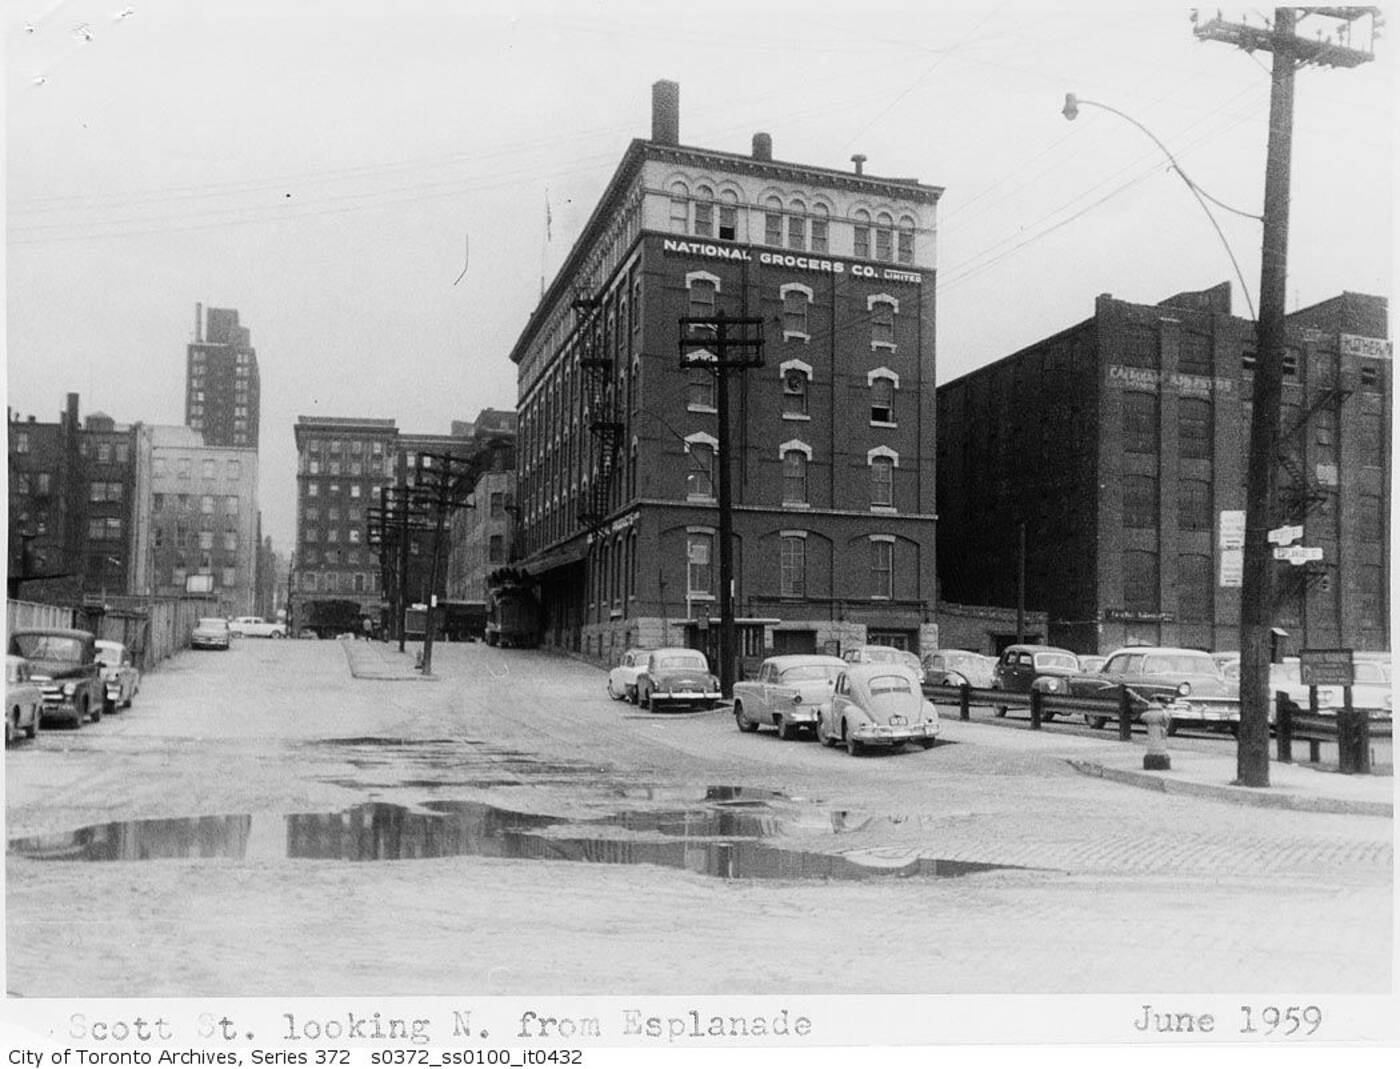 This is what the Esplanade looked like in Toronto over the last 150 years